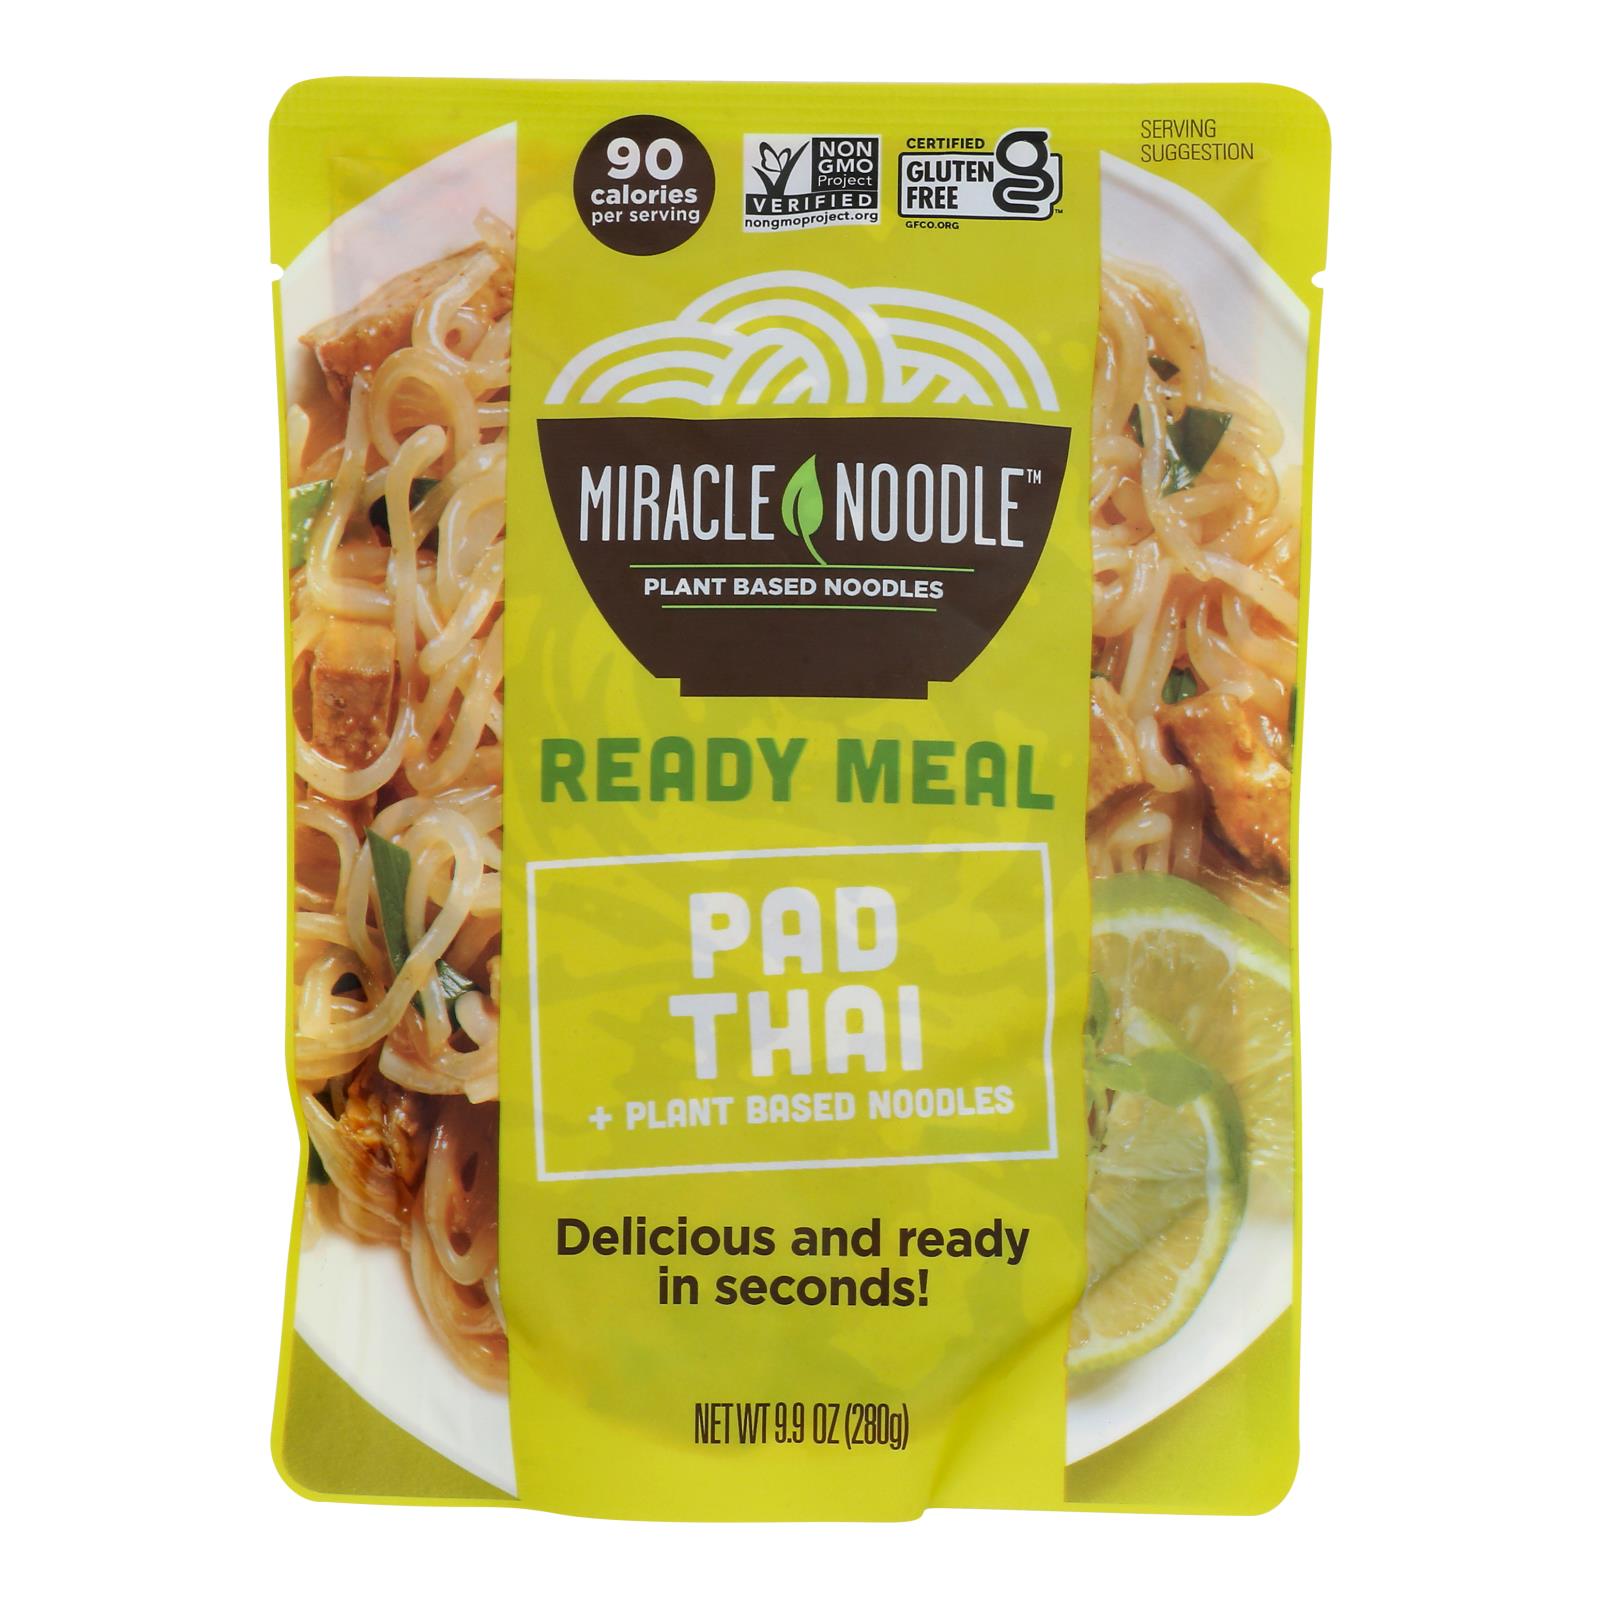 Miracle Noodle - Rte Meal Pad Thai - Case Of 6-9.9 Oz